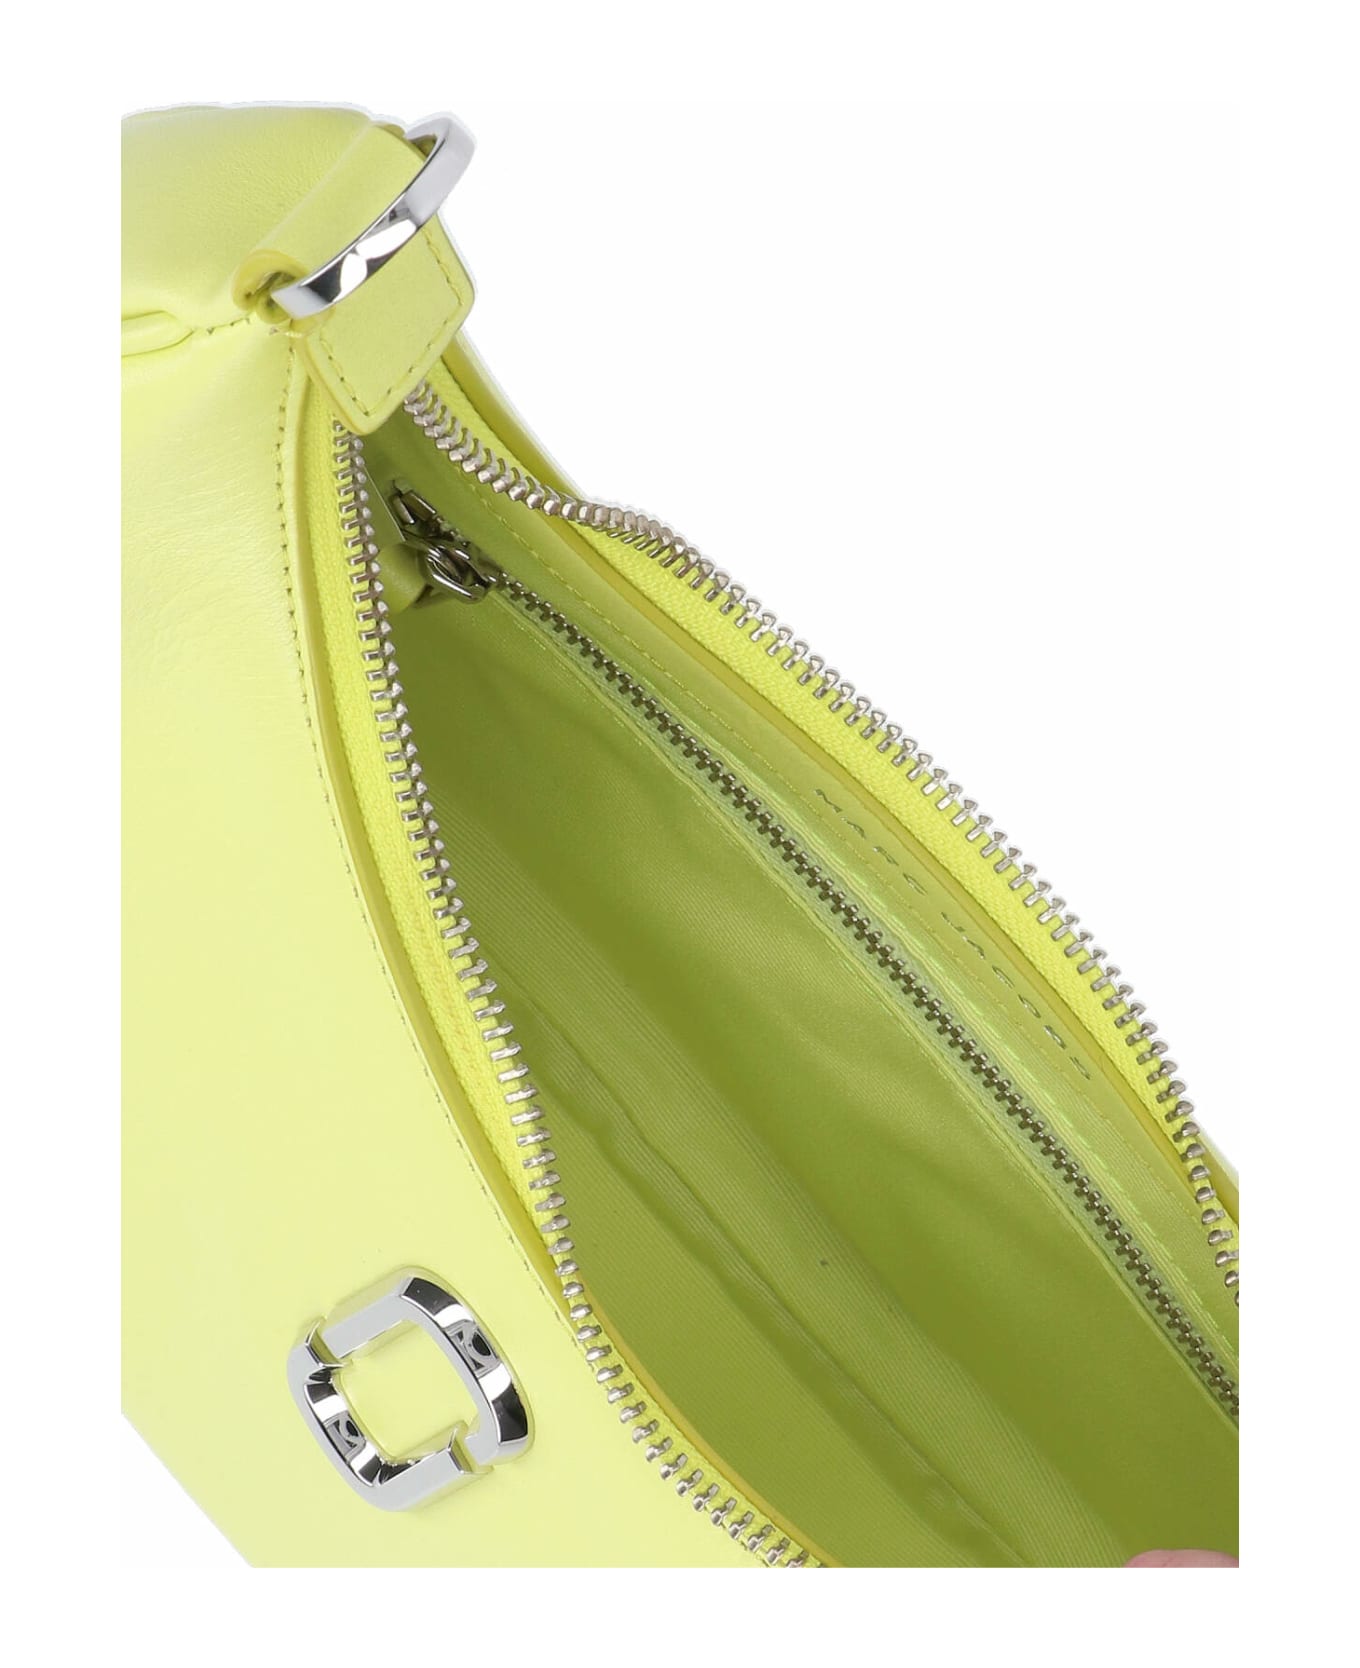 Marc Jacobs The Curve Bag - Yellow